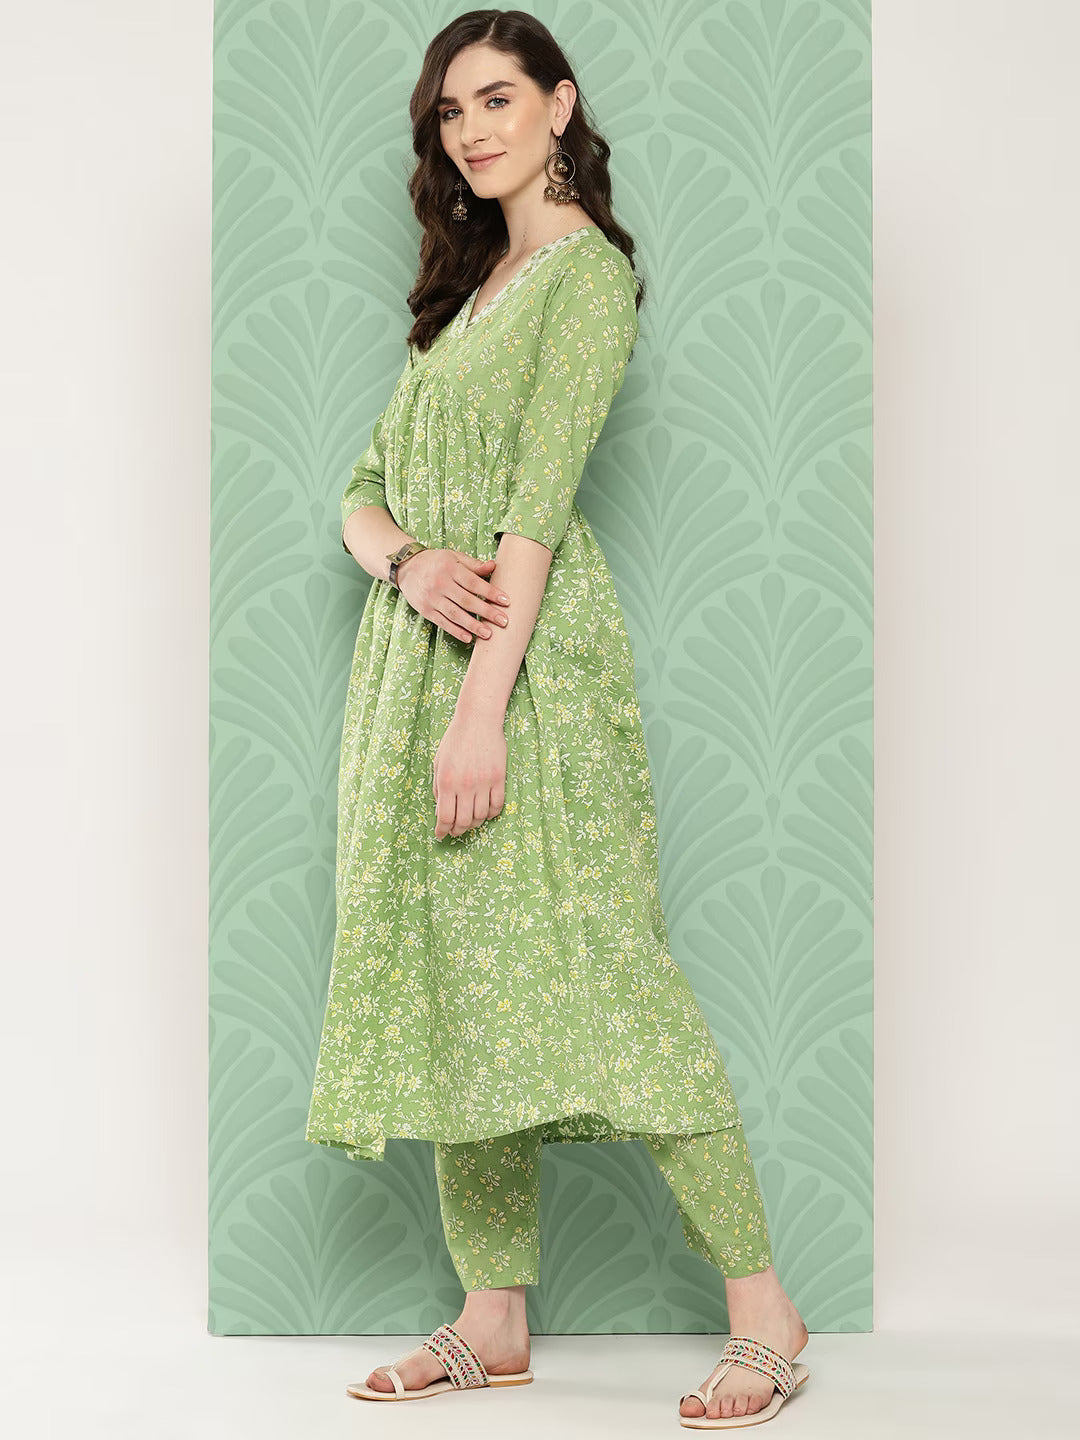 Green Floral Printed Regular Pure Cotton Kurta with Trousers & With Dupatta Set-Yufta Store-1251SKDGRS